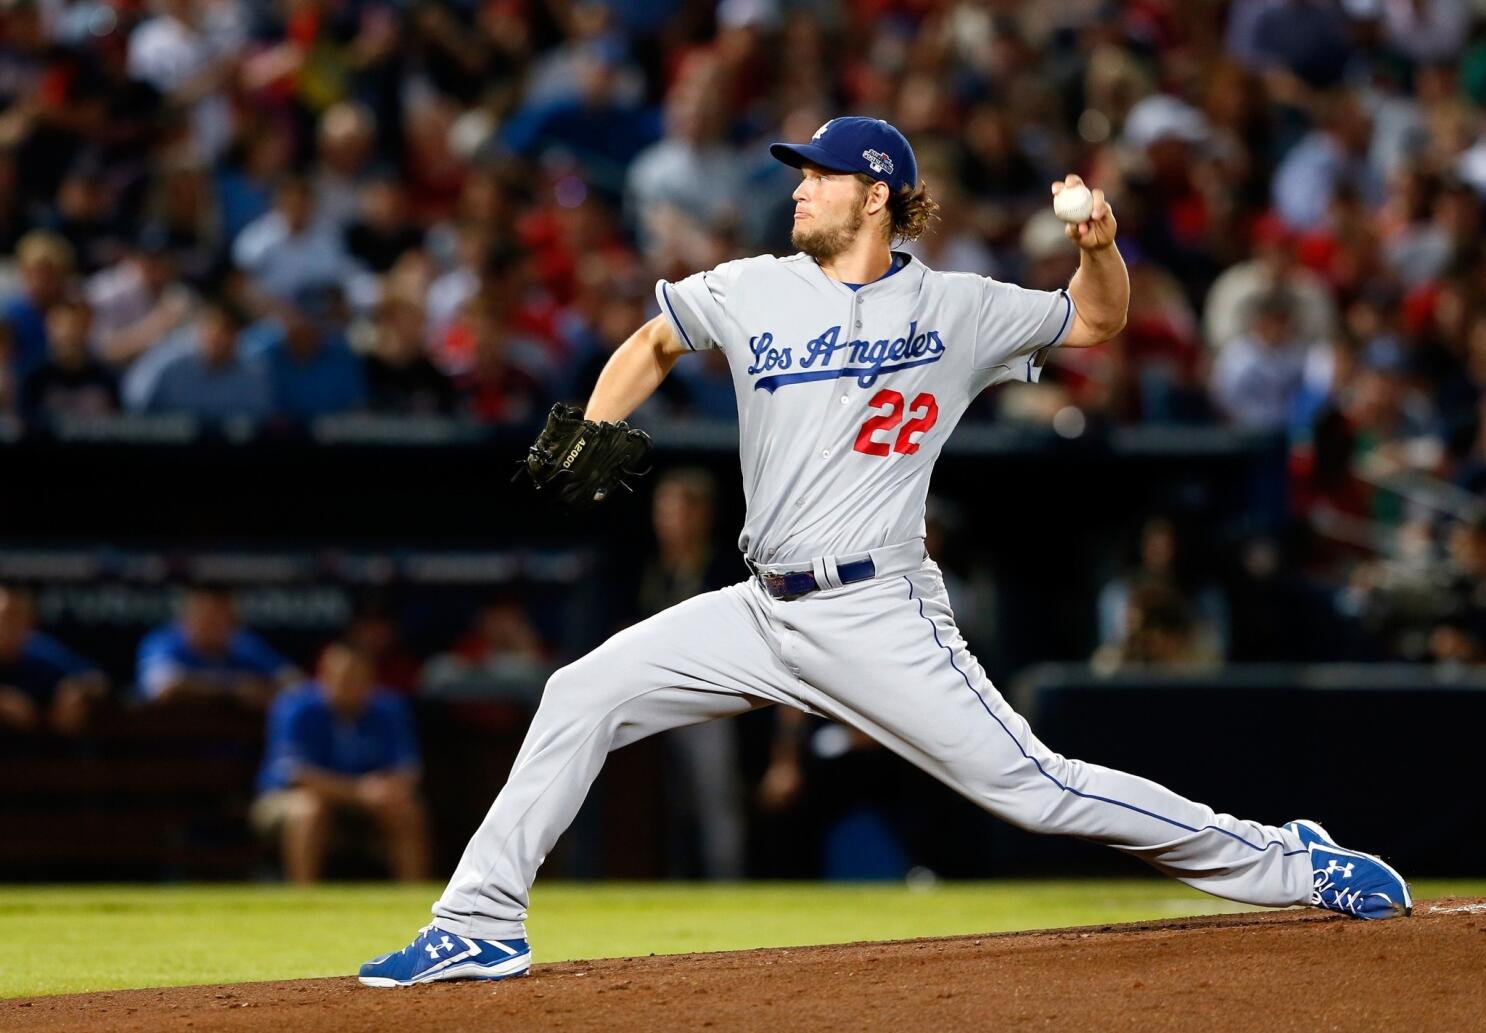 Dodgers' Brian Wilson is working on getting up to speed - Los